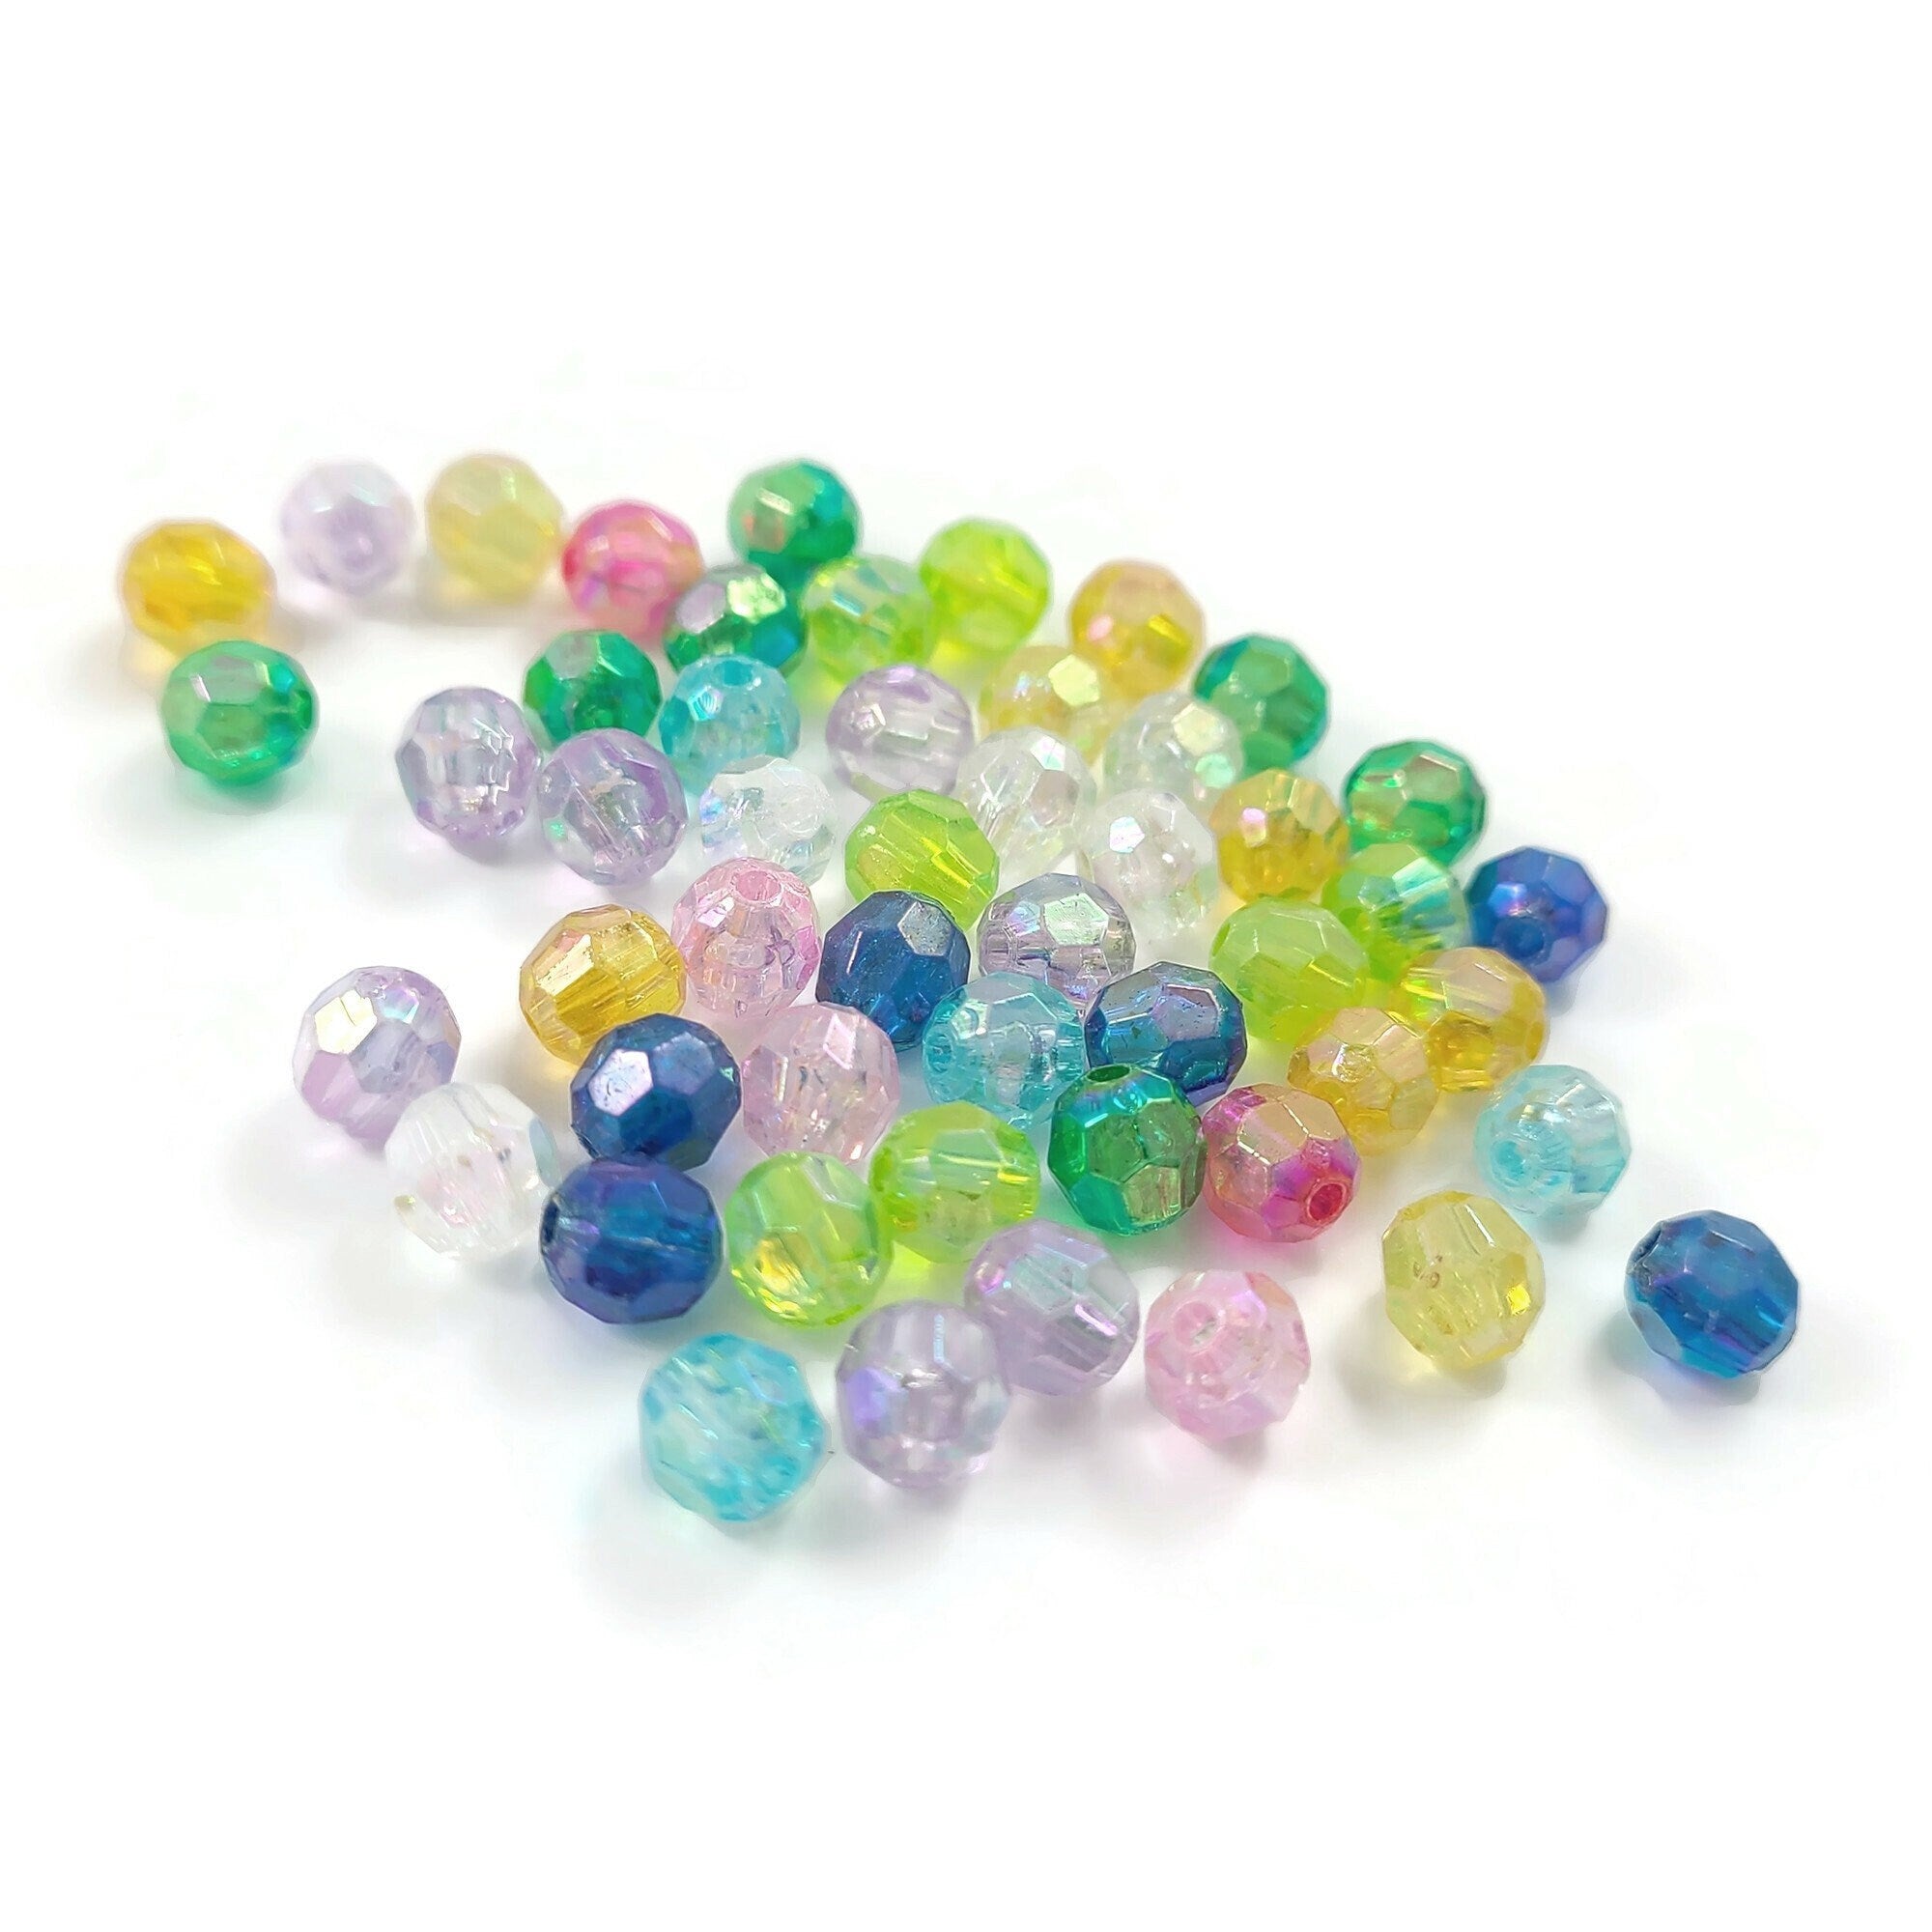 50 mixed transparent pearly faceted beads, Assorted 6mm plastic beads for jewelry making